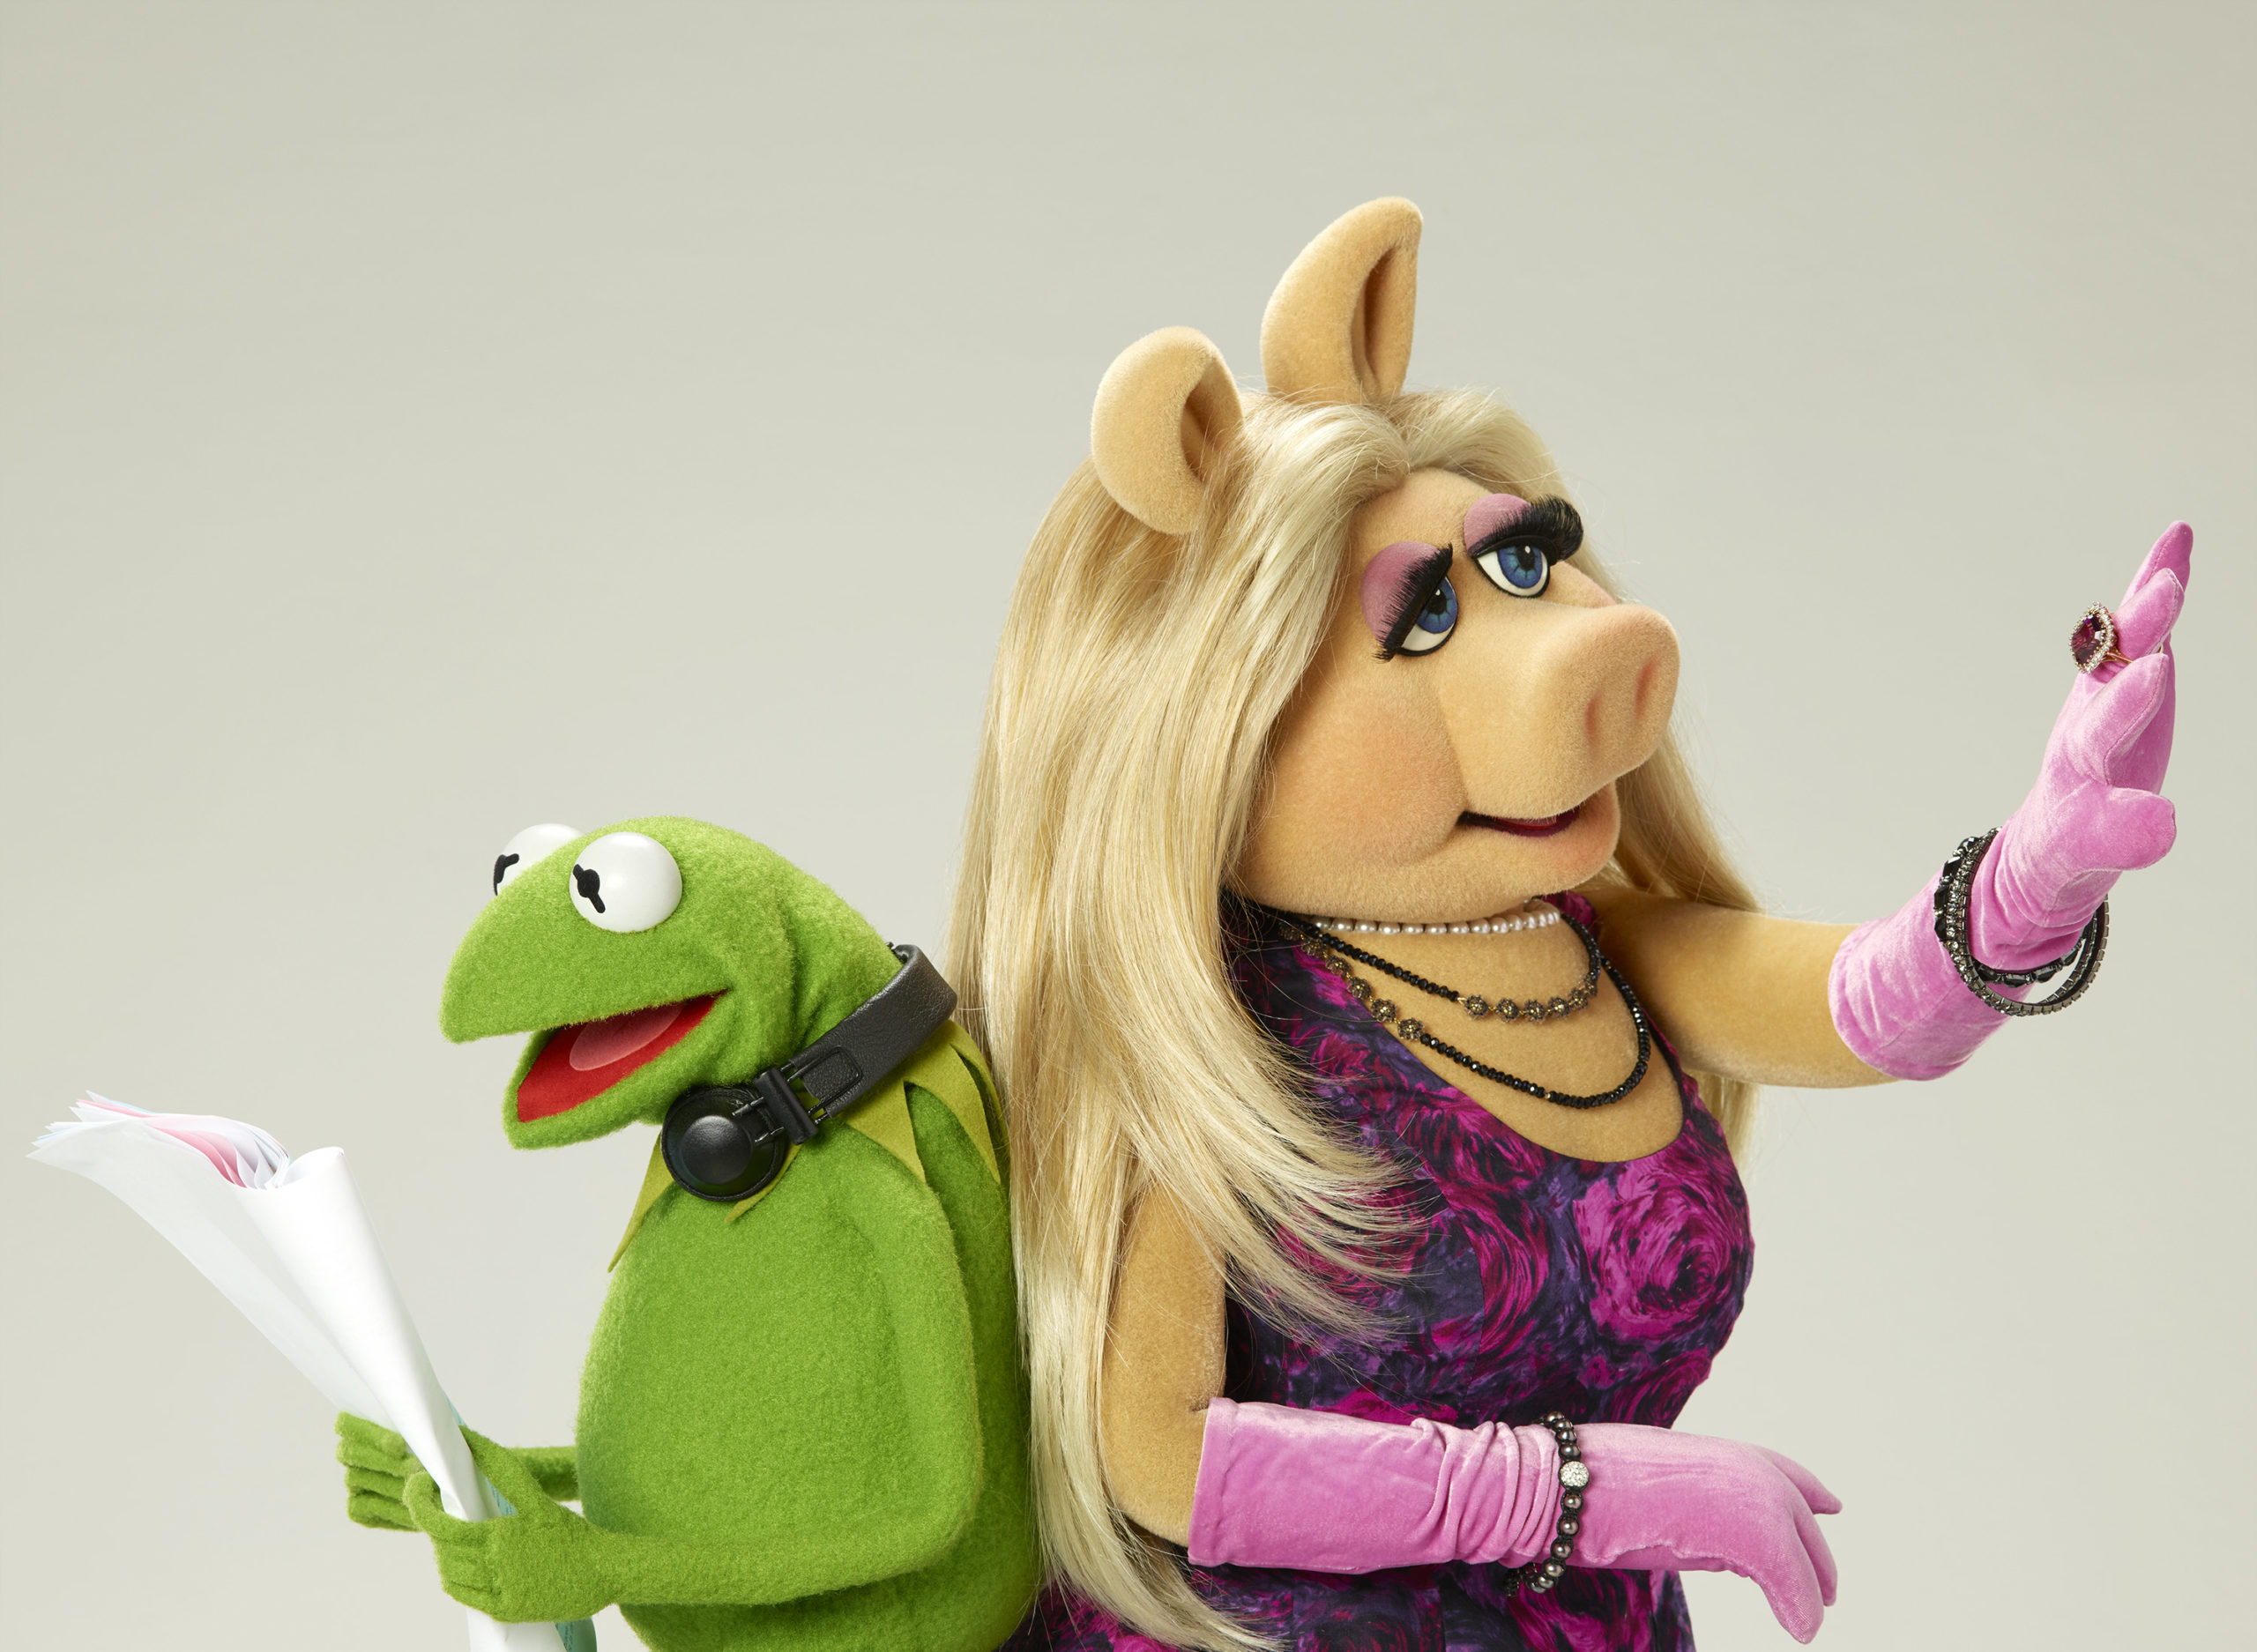 The Muppets – Kermit the Frog, Miss Piggy